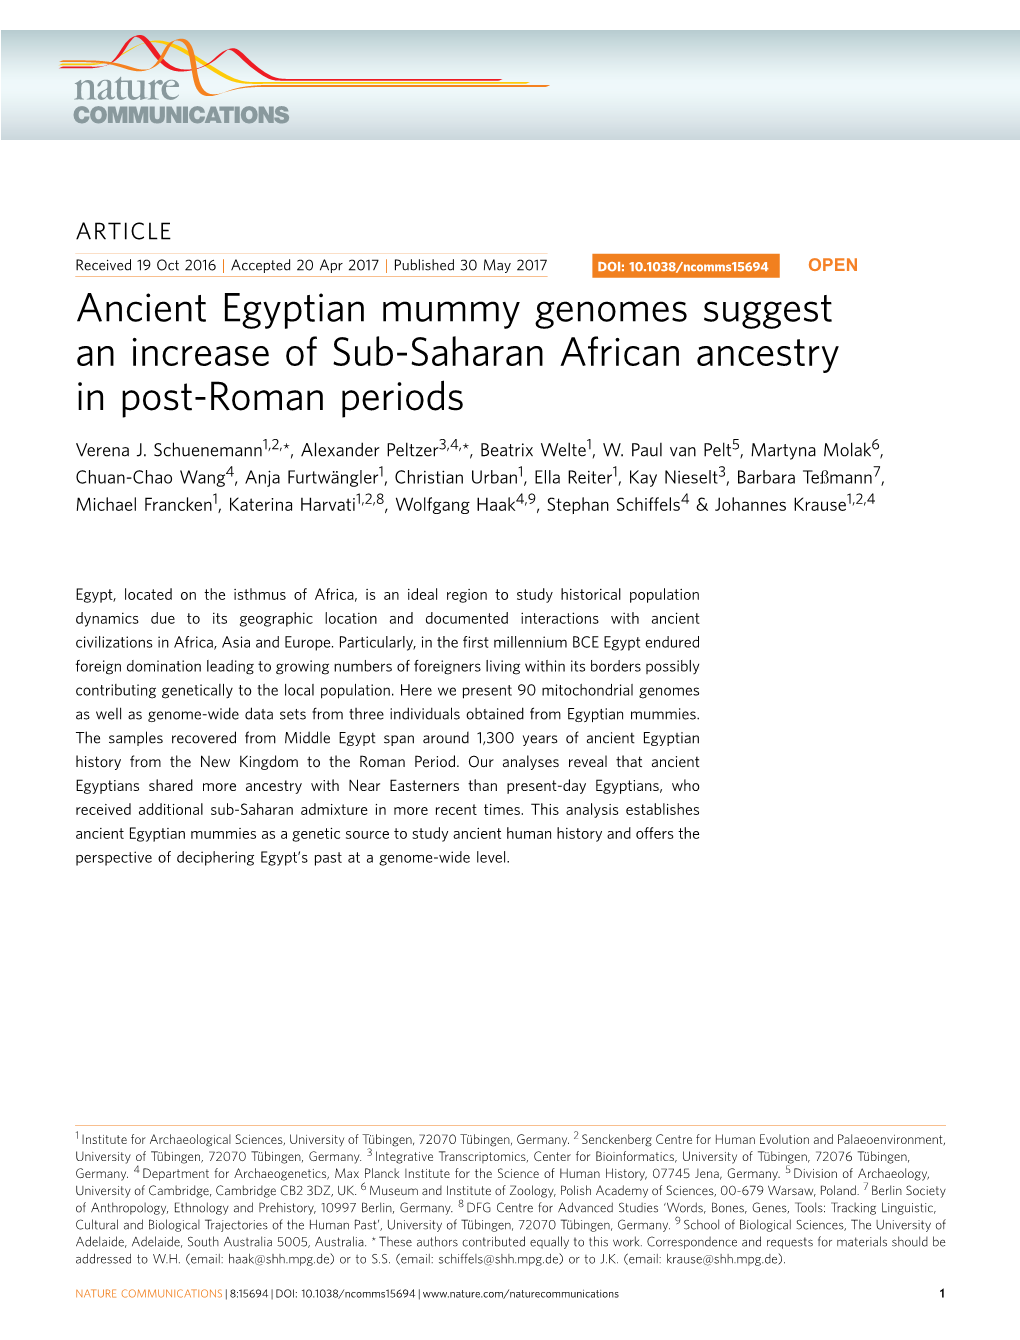 Ancient Egyptian Mummy Genomes Suggest an Increase of Sub-Saharan African Ancestry in Post-Roman Periods